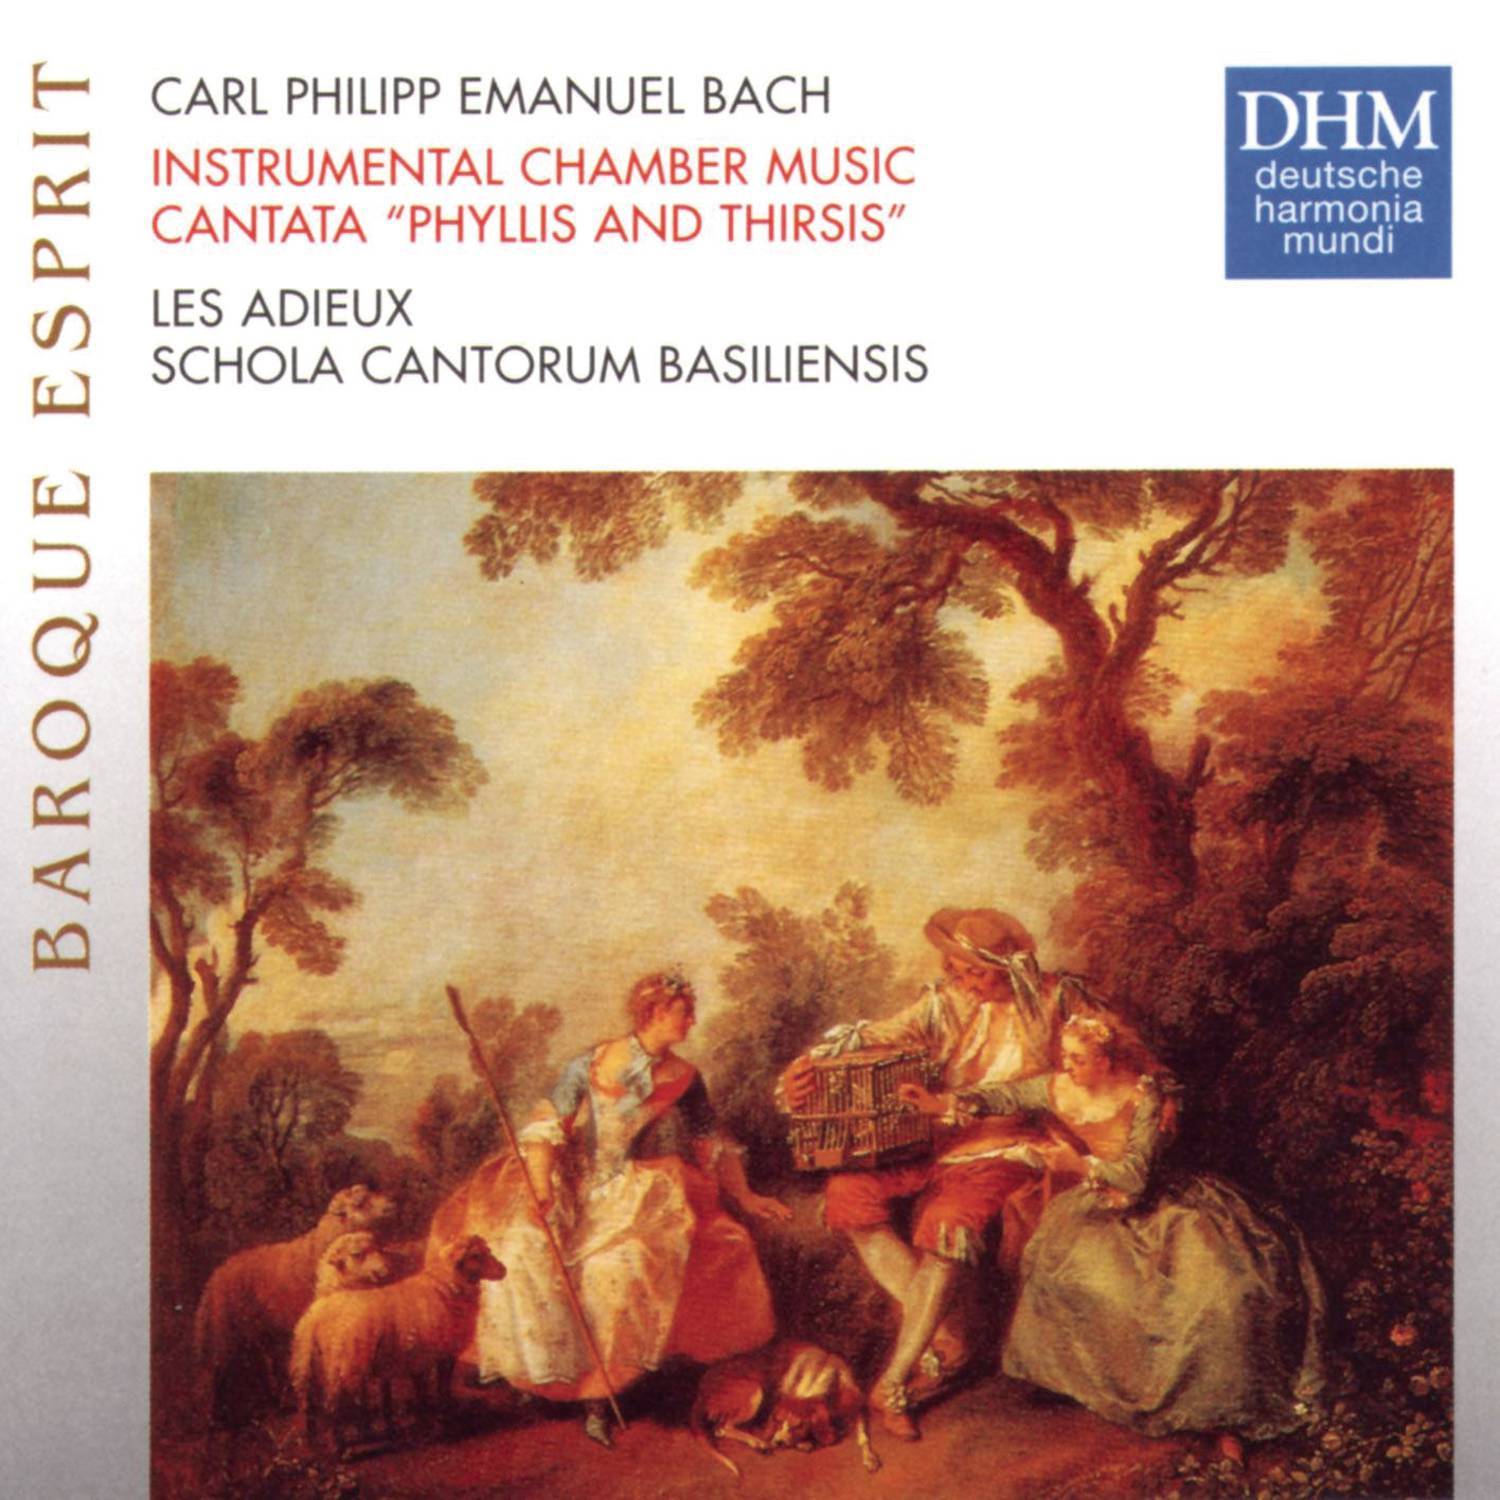 C.P.E. Bach: Instrumental Chamber Music; Cantata "Phyllis and Thirsis"